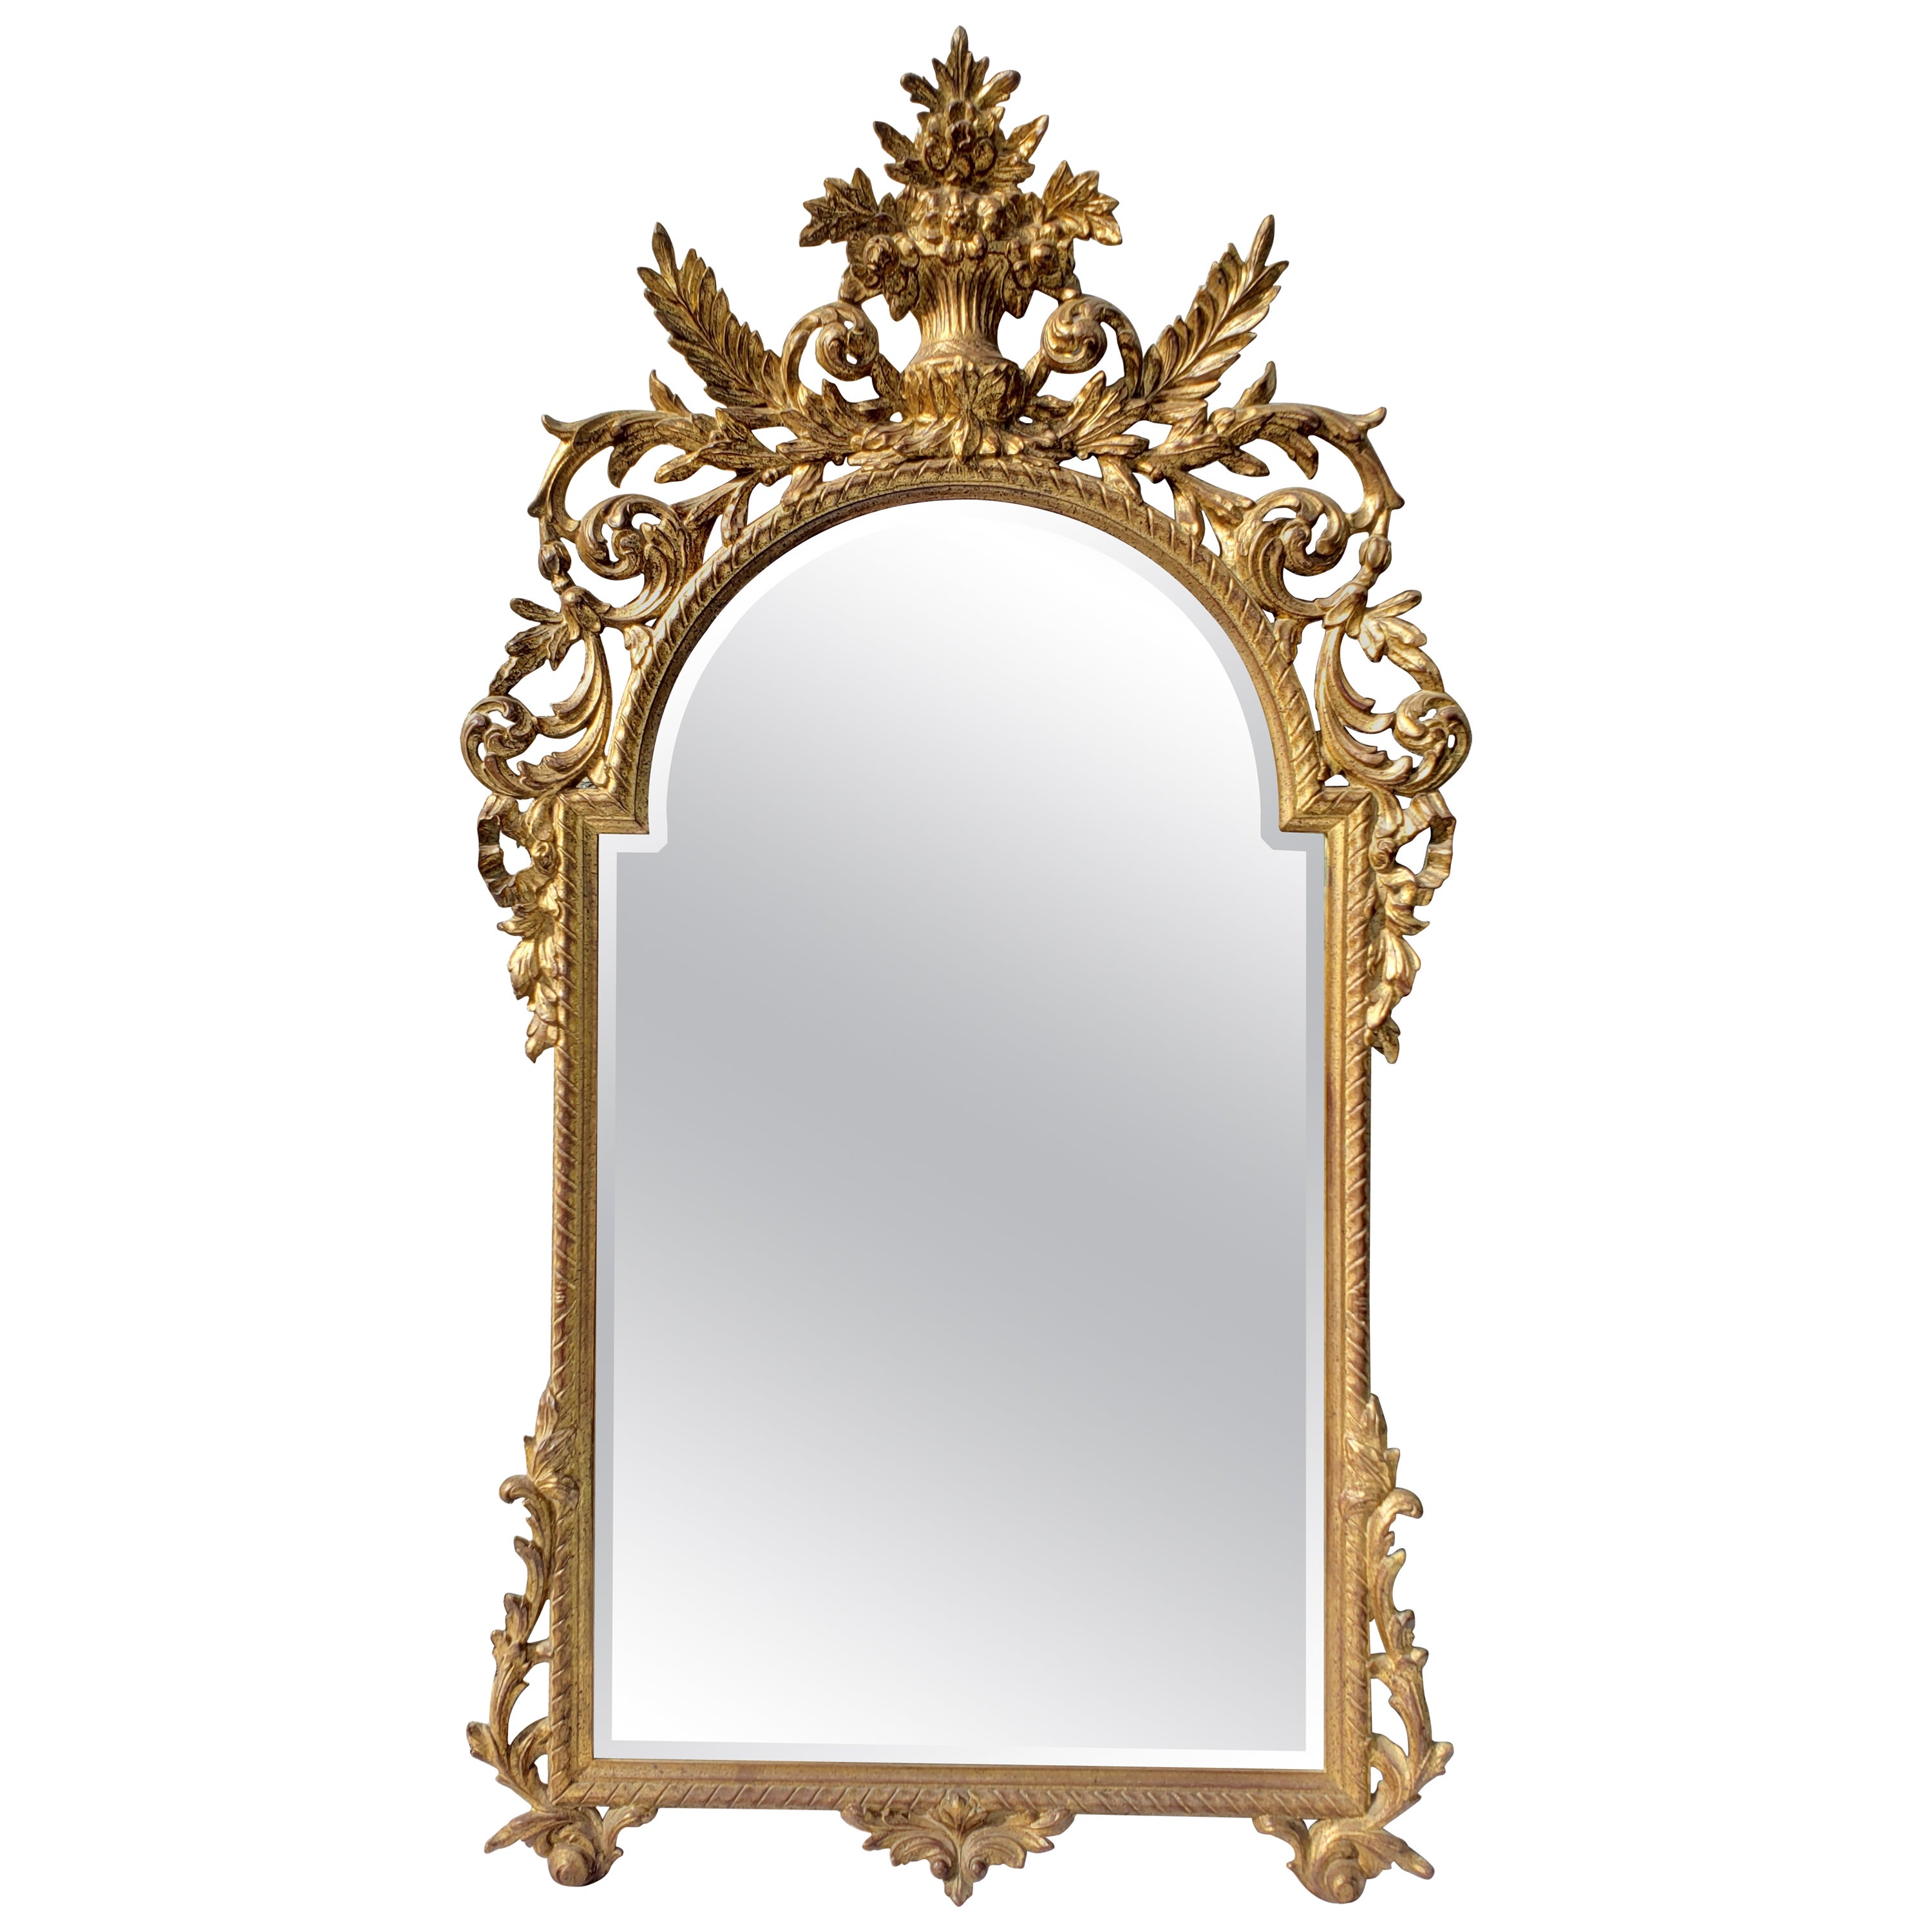 Louis XV Style Gilt Decorated Beveled Wall Mirror